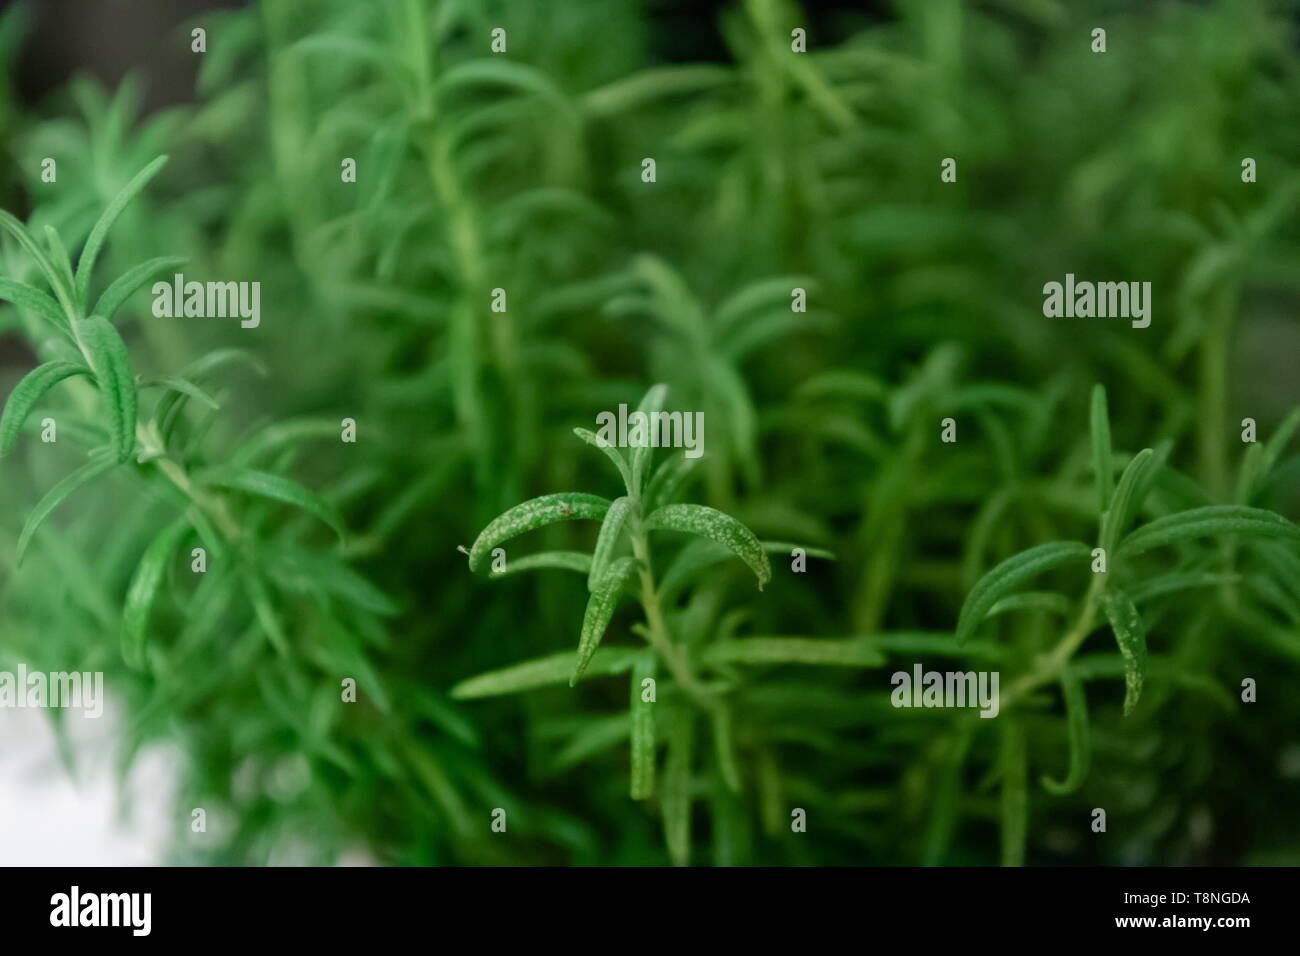 Diseases of plants. Aphid and powdery mildew on rosemary leaves - image Stock Photo